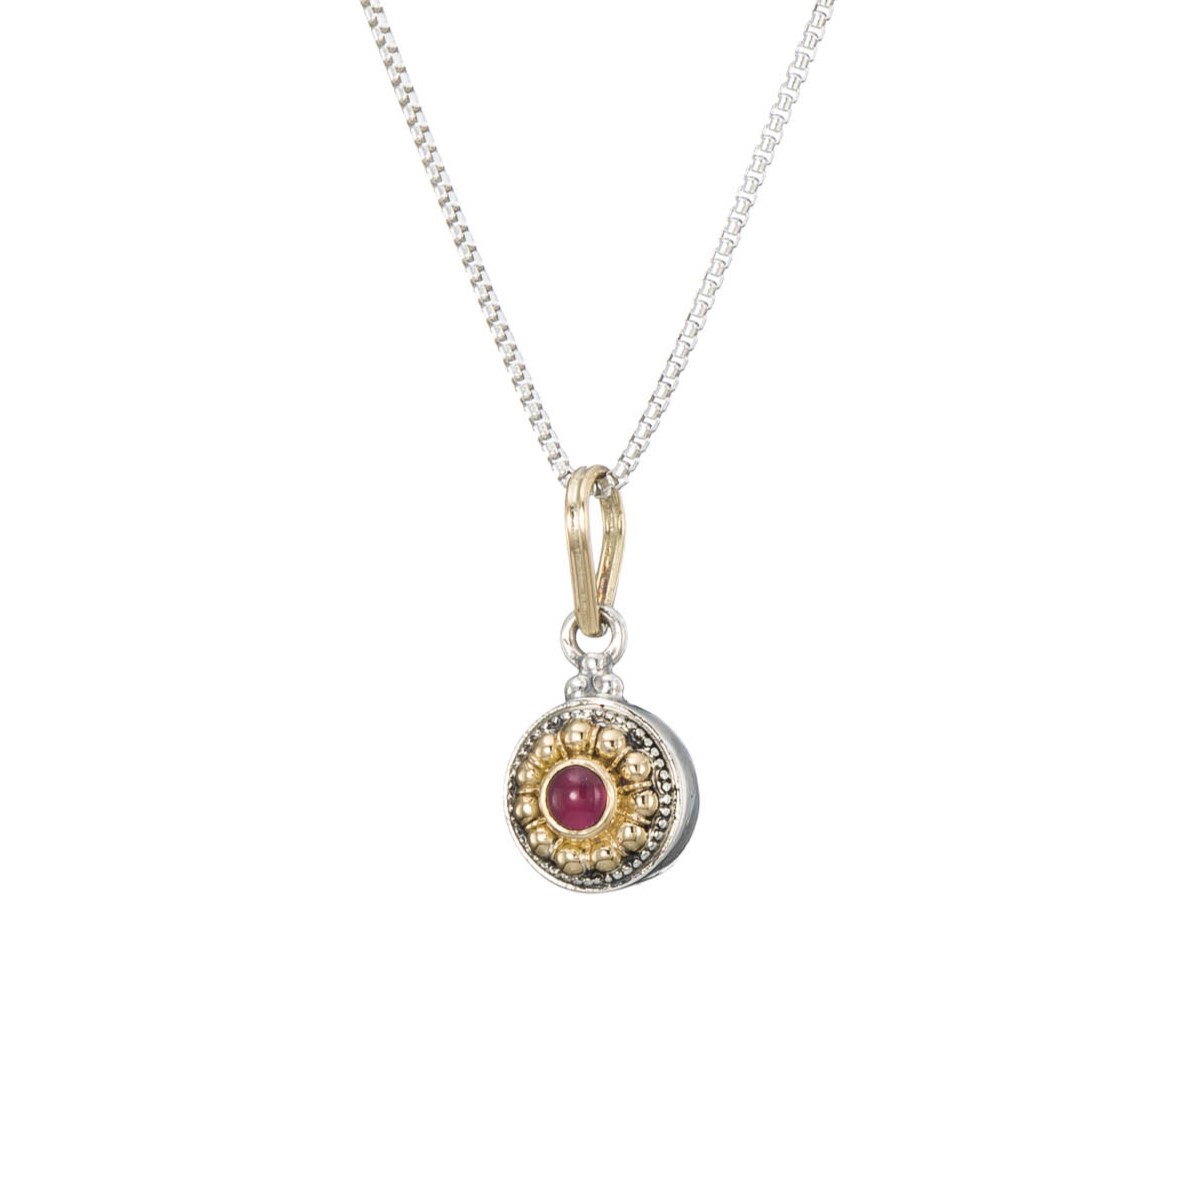 Athenian flowers small round pendant in 18K Gold and Sterling Silver